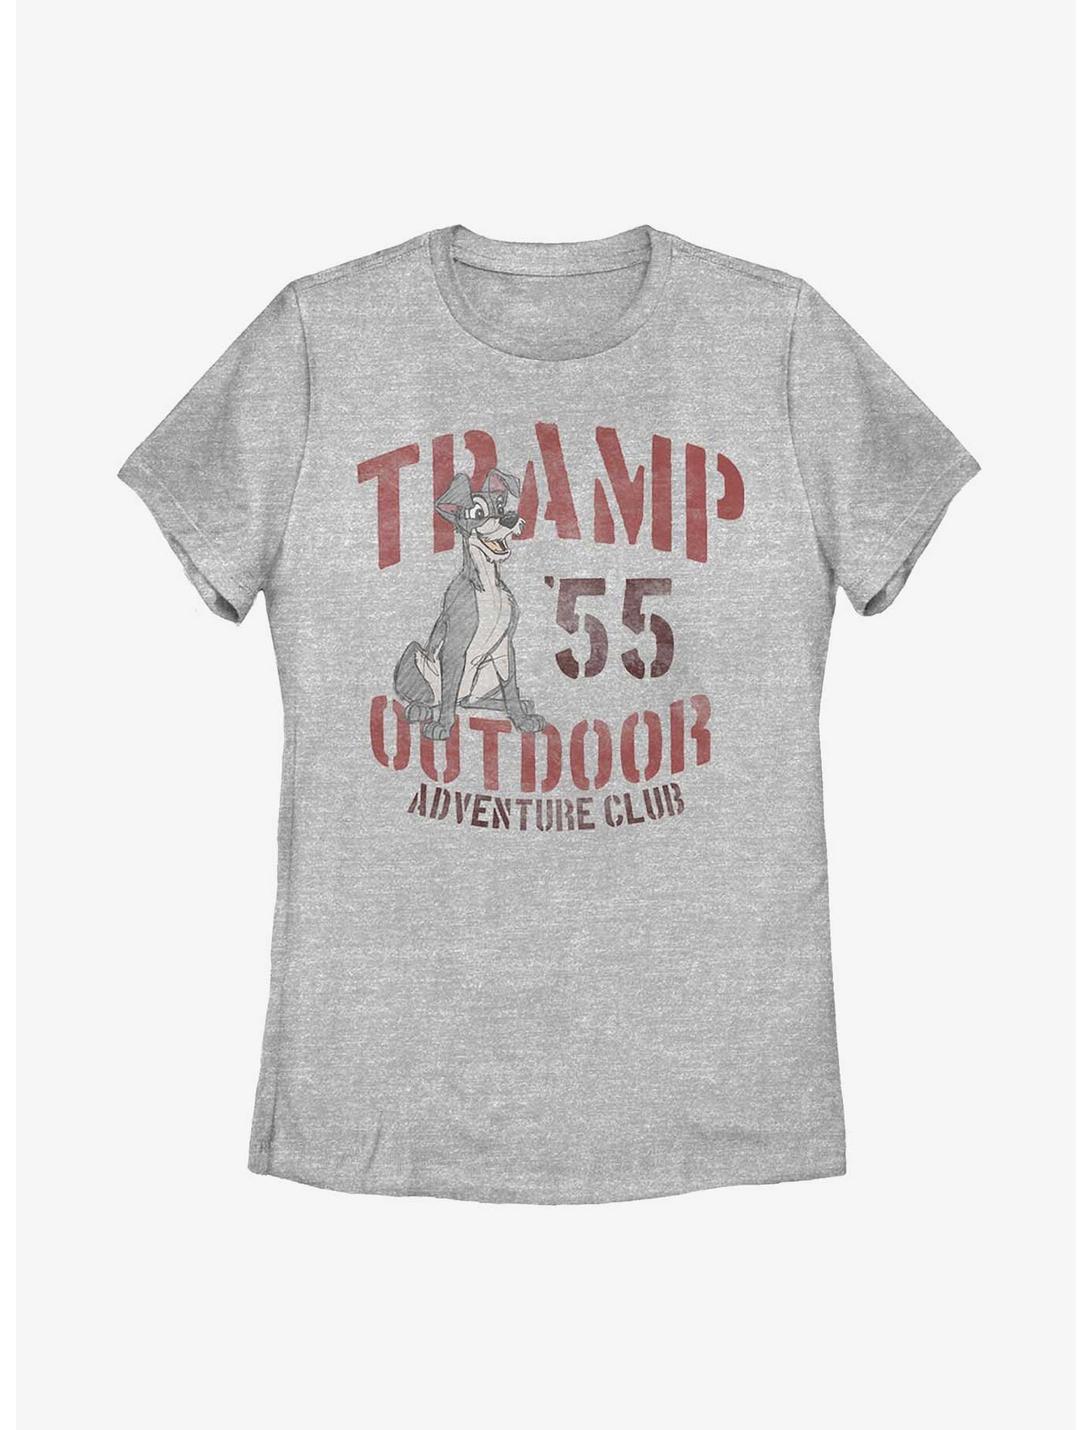 Disney Lady And The Tramp Outdoor Adventure Club Womens T-Shirt, ATH HTR, hi-res